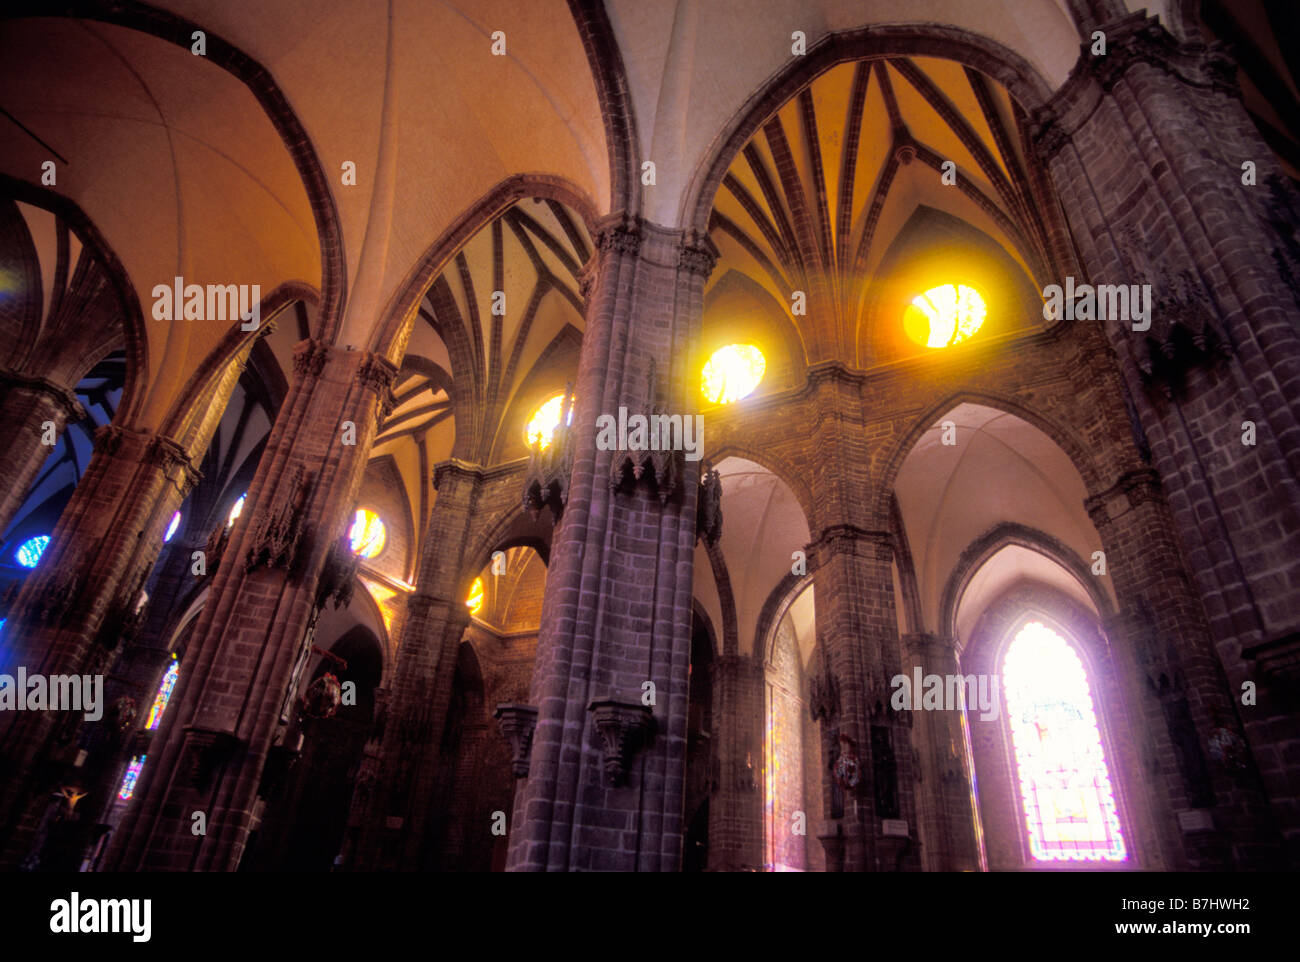 Interior of Our Lady of Guadalupe Cathedral in Zamora Michoacan Mexico Stock Photo